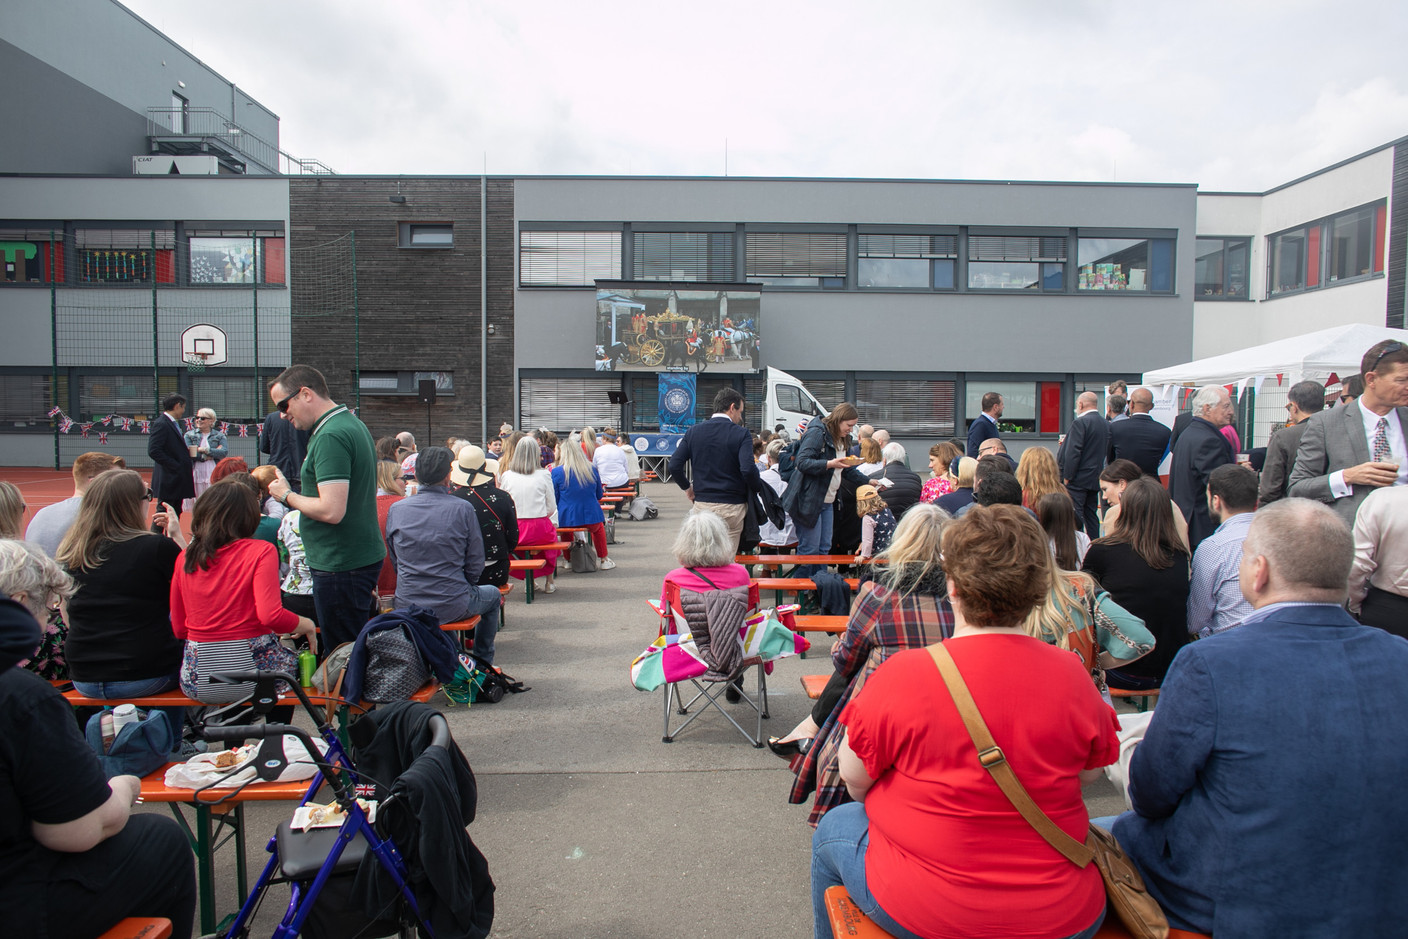 People gathered at St George’s International School in Luxembourg to celebrate the coronation of King Charles III and Queen Camilla on 6 May 2023, which was shown on a large screen. Photo: Matic Zorman / Maison Moderne